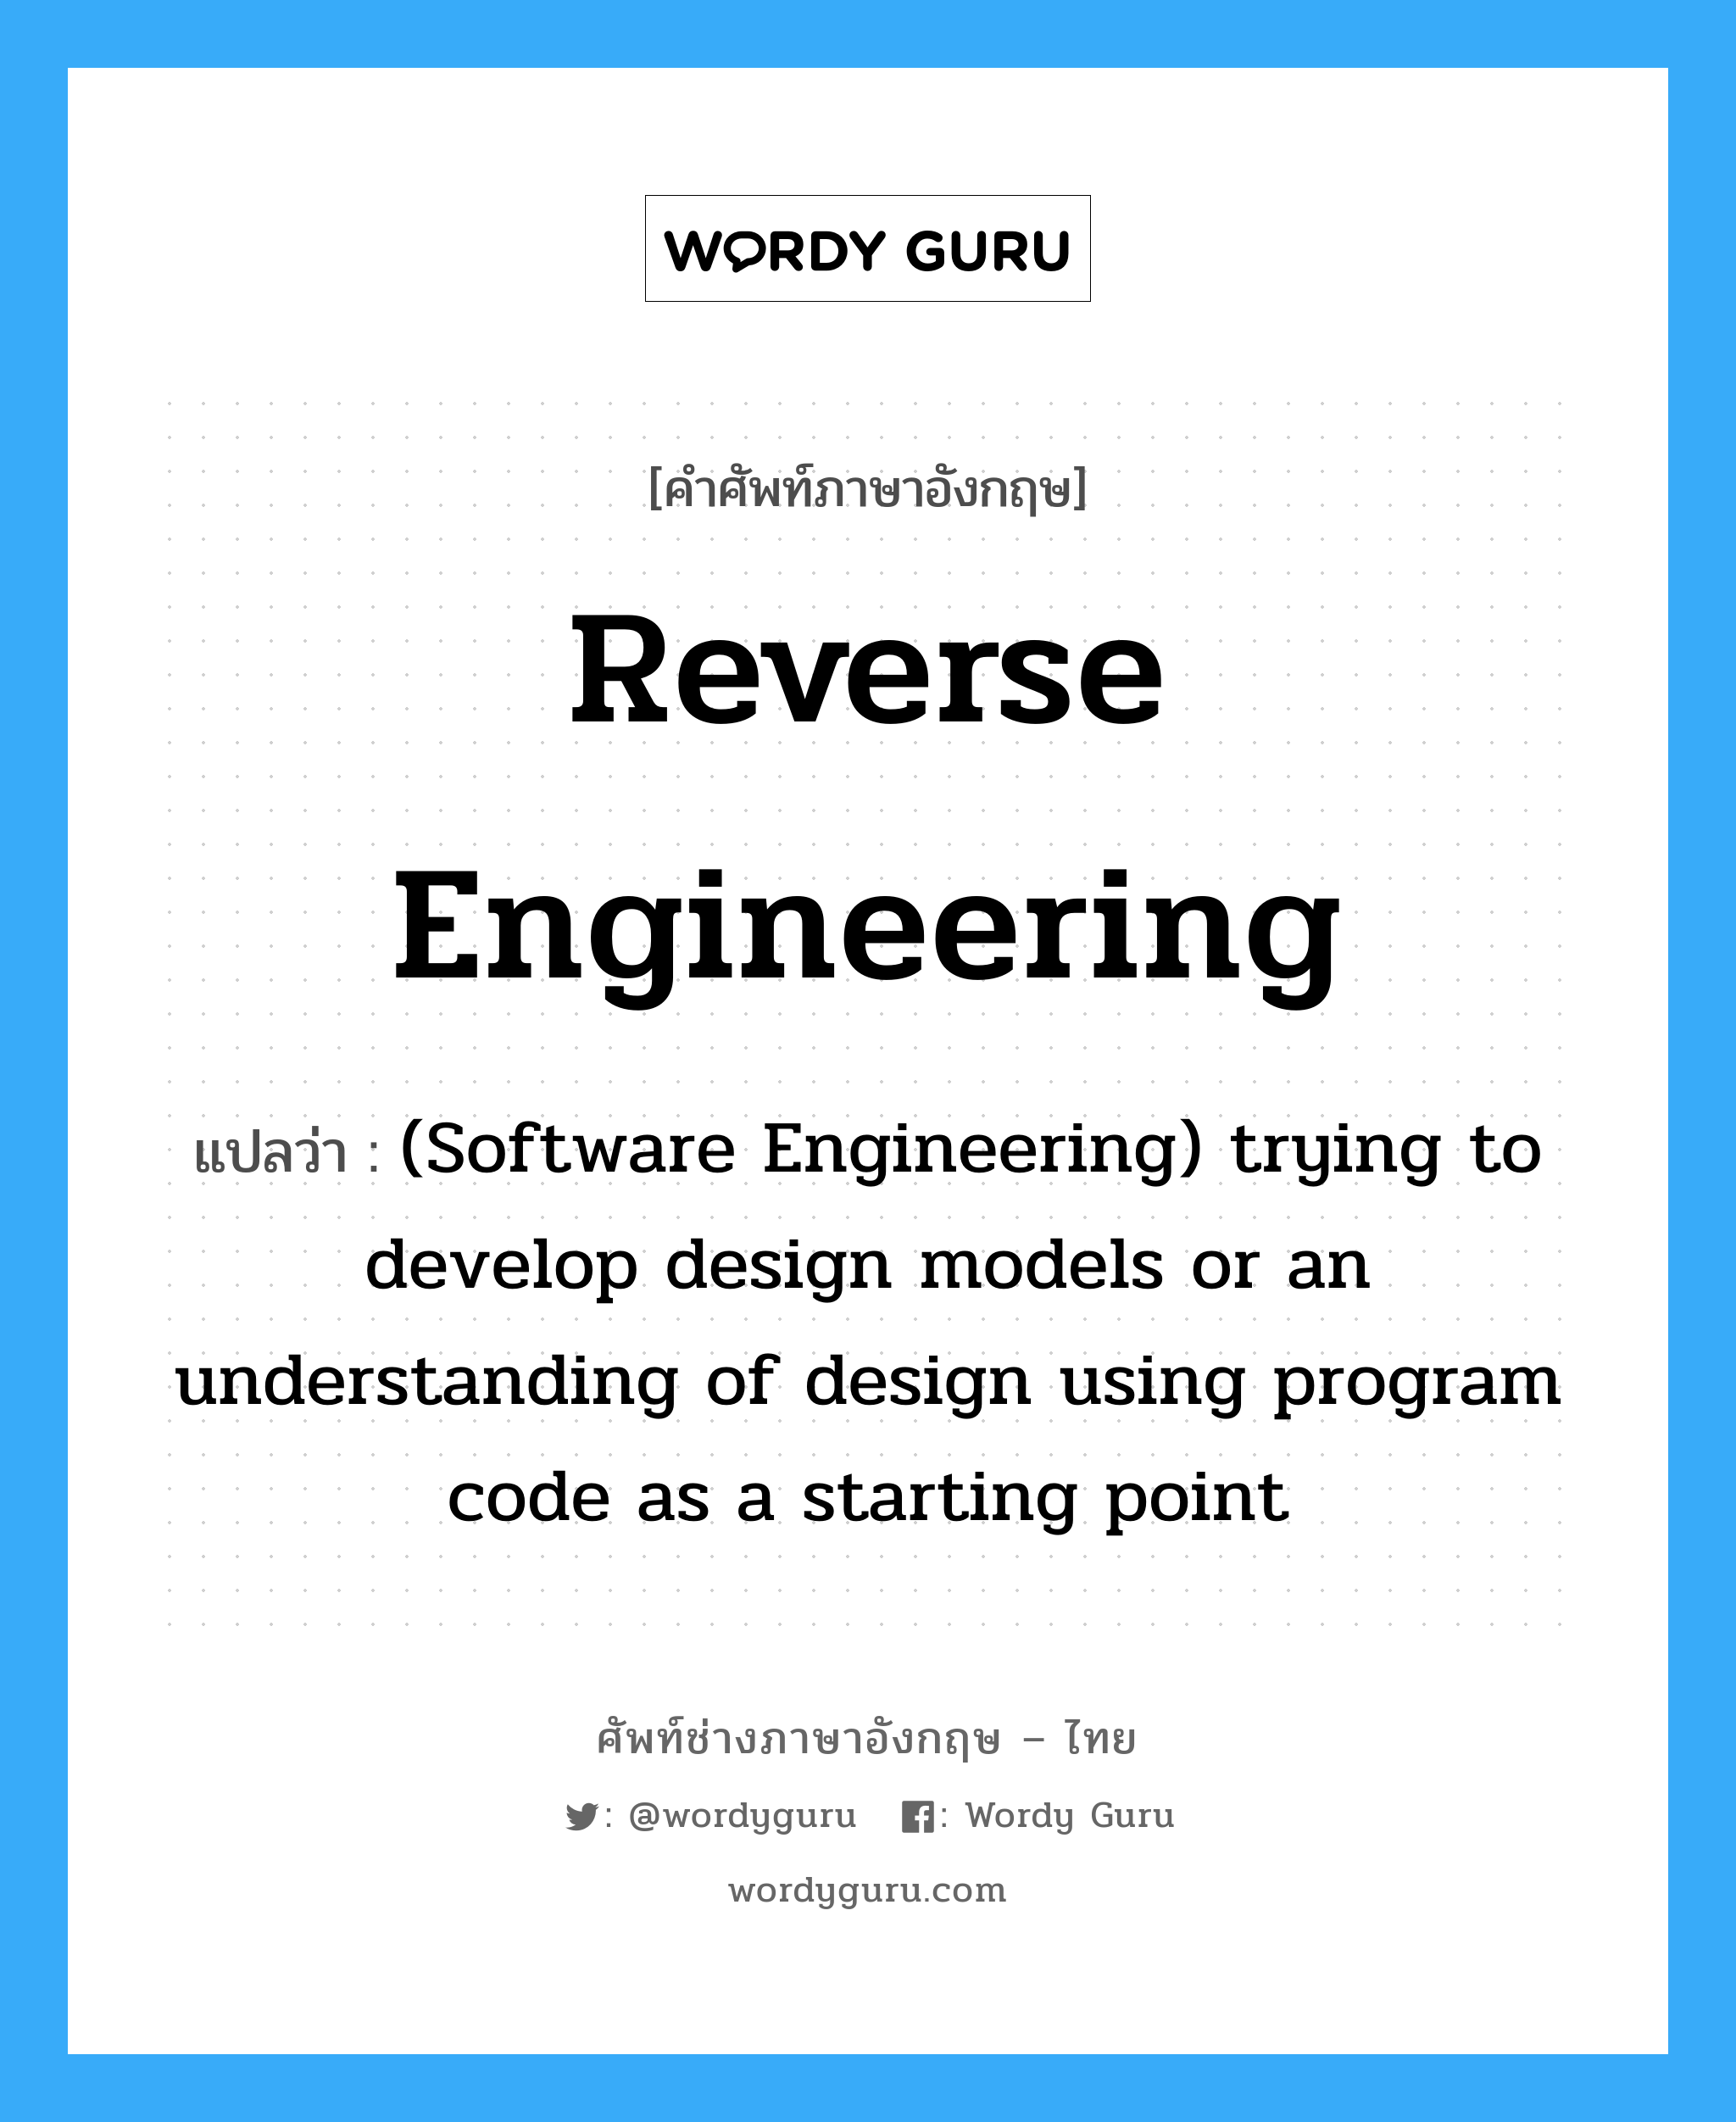 (Software Engineering) trying to develop design models or an understanding of design using program code as a starting point ภาษาอังกฤษ?, คำศัพท์ช่างภาษาอังกฤษ - ไทย (Software Engineering) trying to develop design models or an understanding of design using program code as a starting point คำศัพท์ภาษาอังกฤษ (Software Engineering) trying to develop design models or an understanding of design using program code as a starting point แปลว่า Reverse engineering